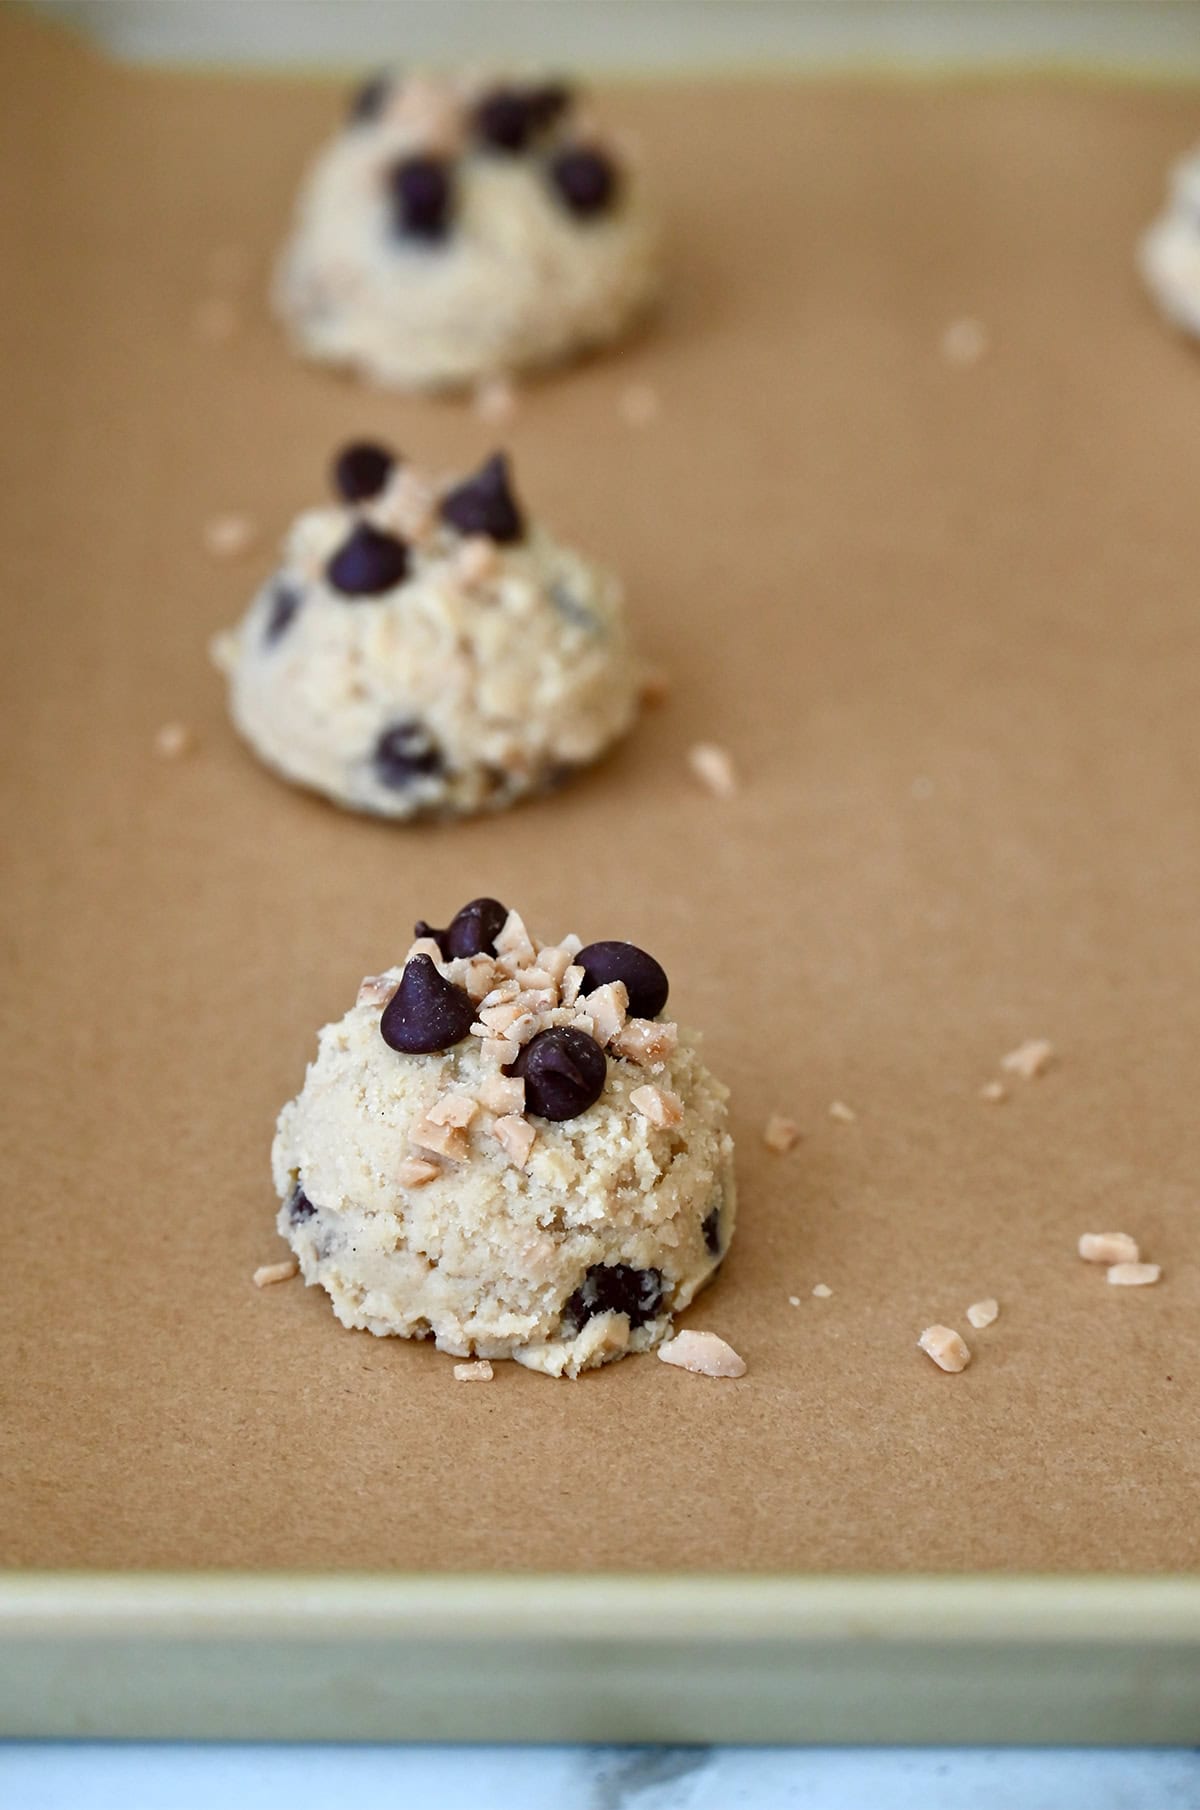 Balls of cookie dough topped with chocolate chips on a baking sheet lined with parchment paper.